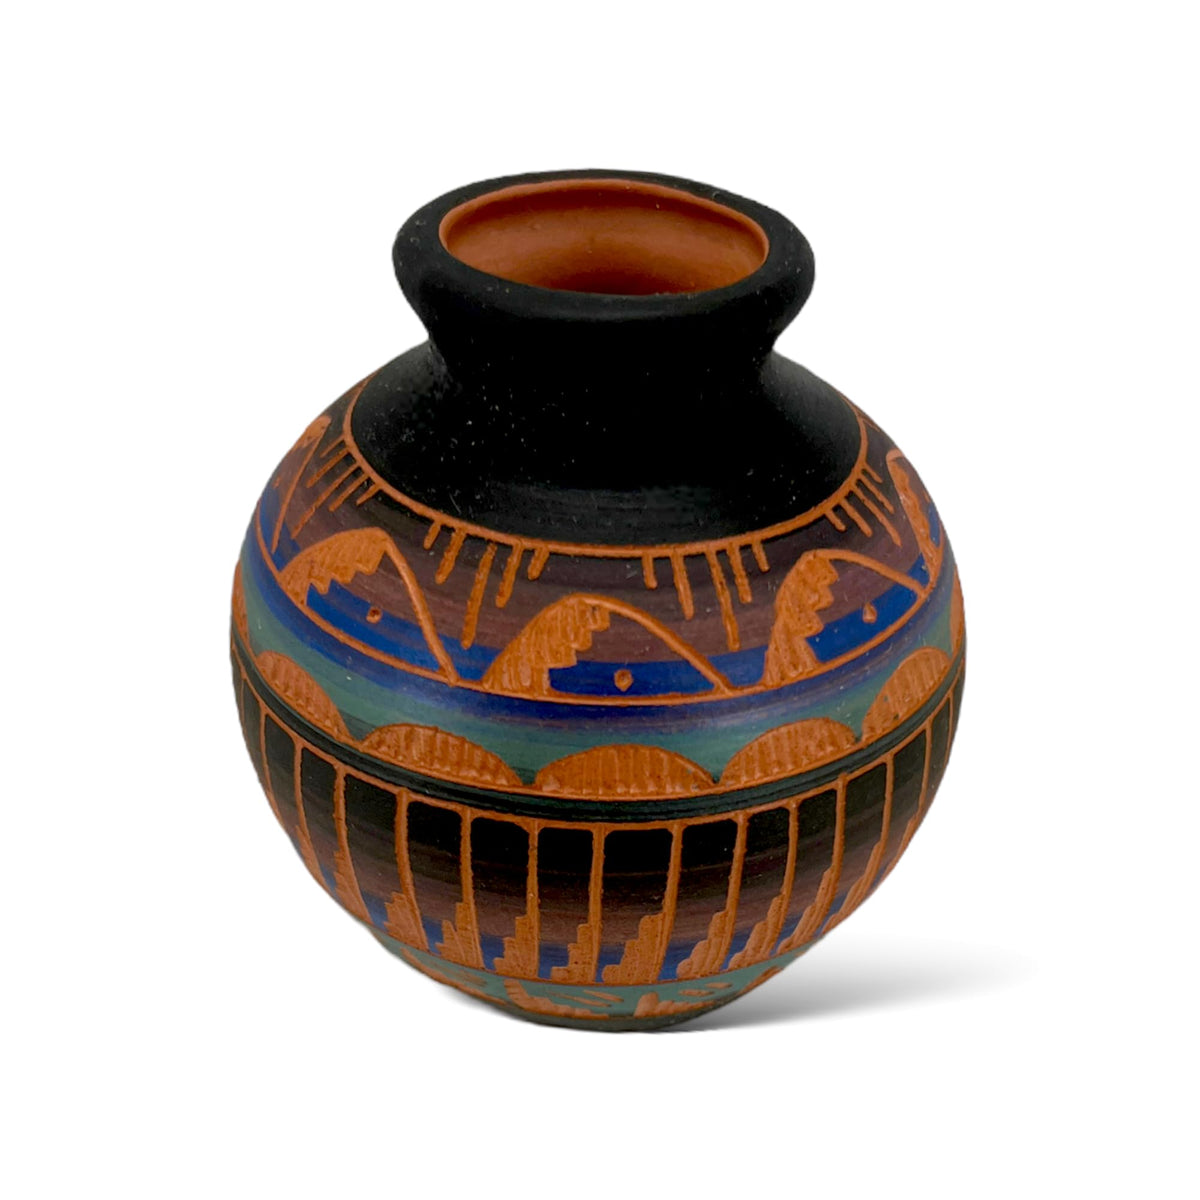 Authentic Native American Pottery, Miniature Traditional Vase Style Pot, Genuine Navajo Tribe USA Hand Painted, Artist Signed, Small Southwestern Home Decor Collectible, Rustic Handmade Decoration